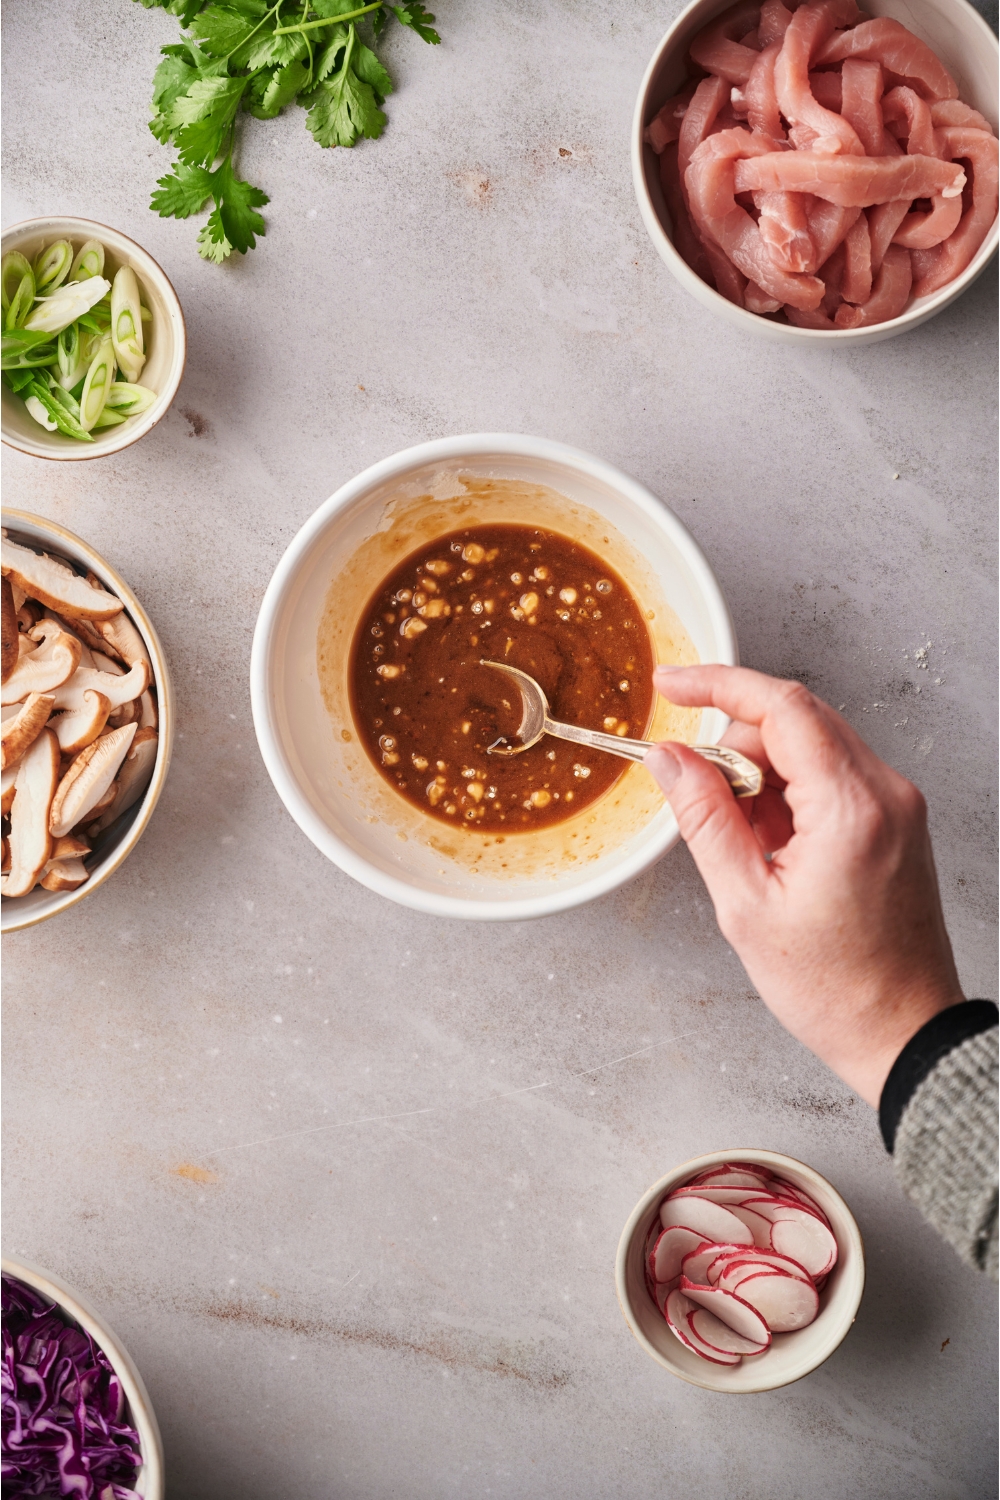 A hand holding a spoon in a bowl with moo shoo pork marinade.